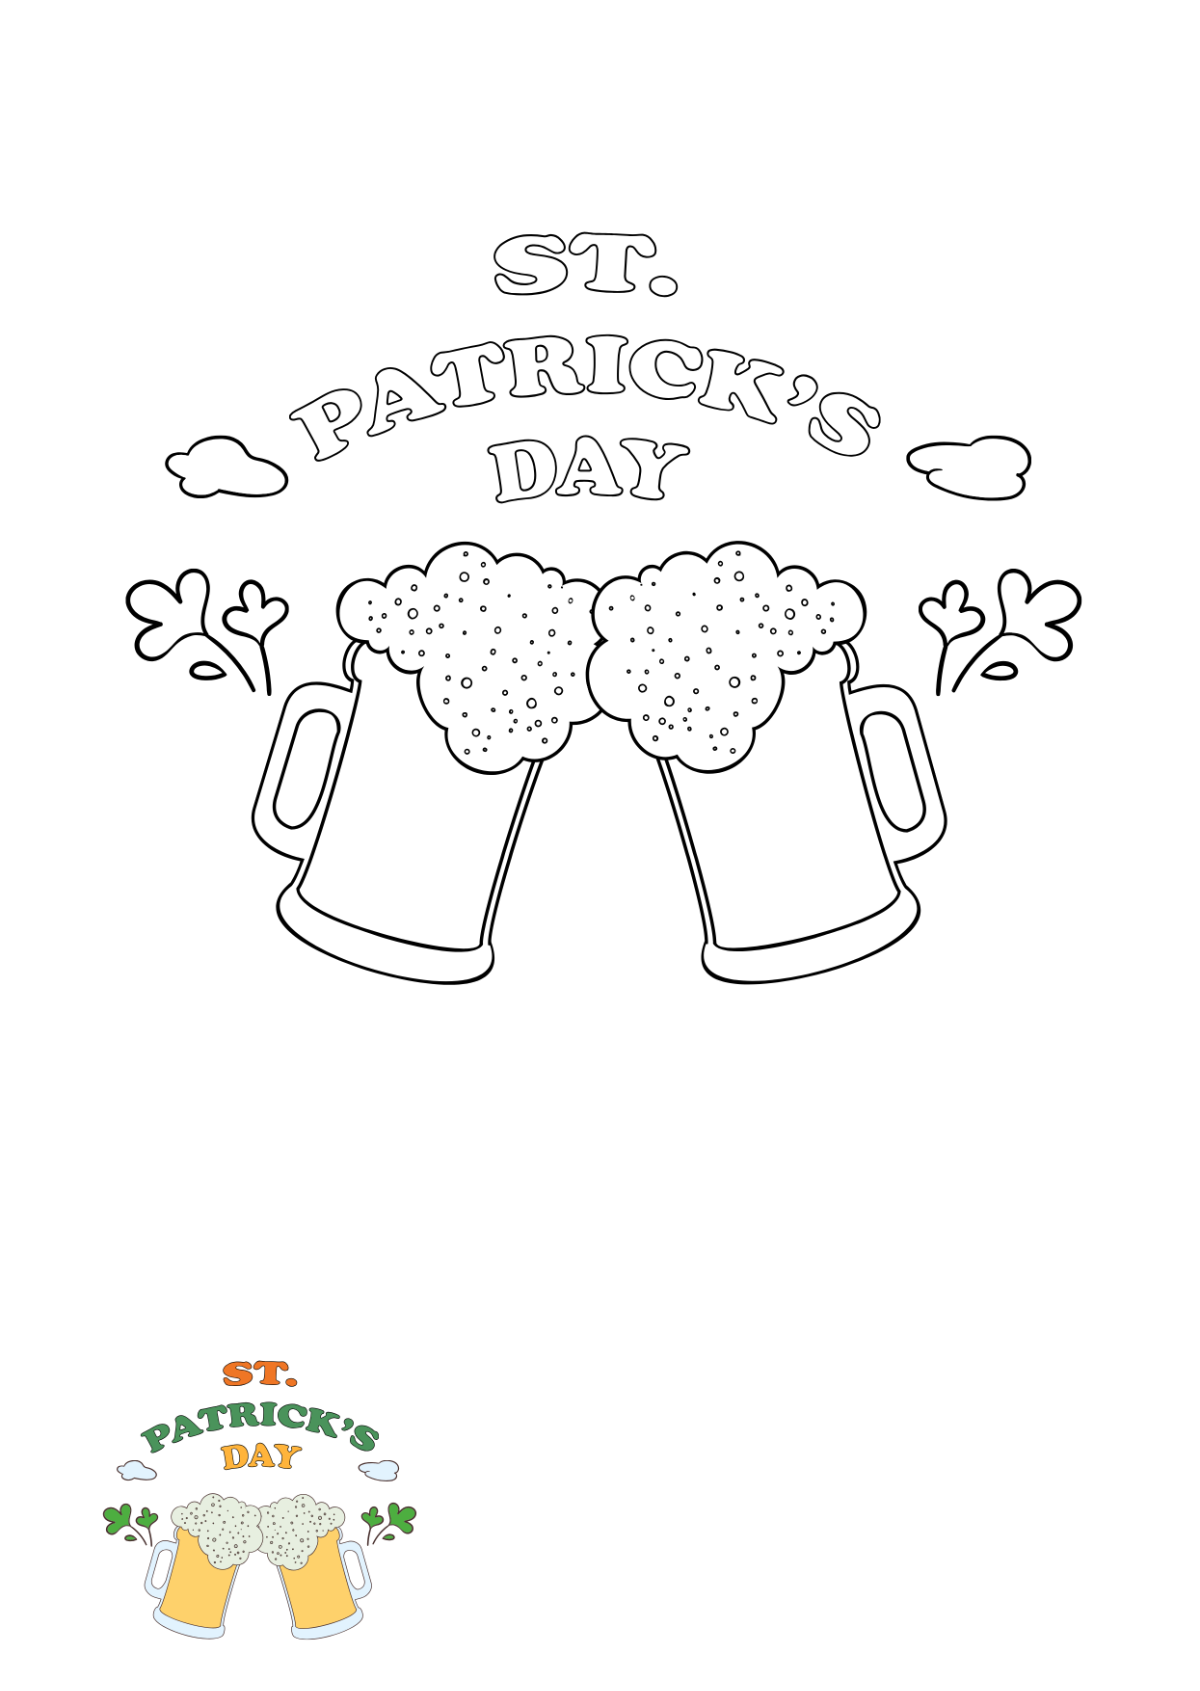 Free Simple St. Patrick’s Day Coloring Page Template